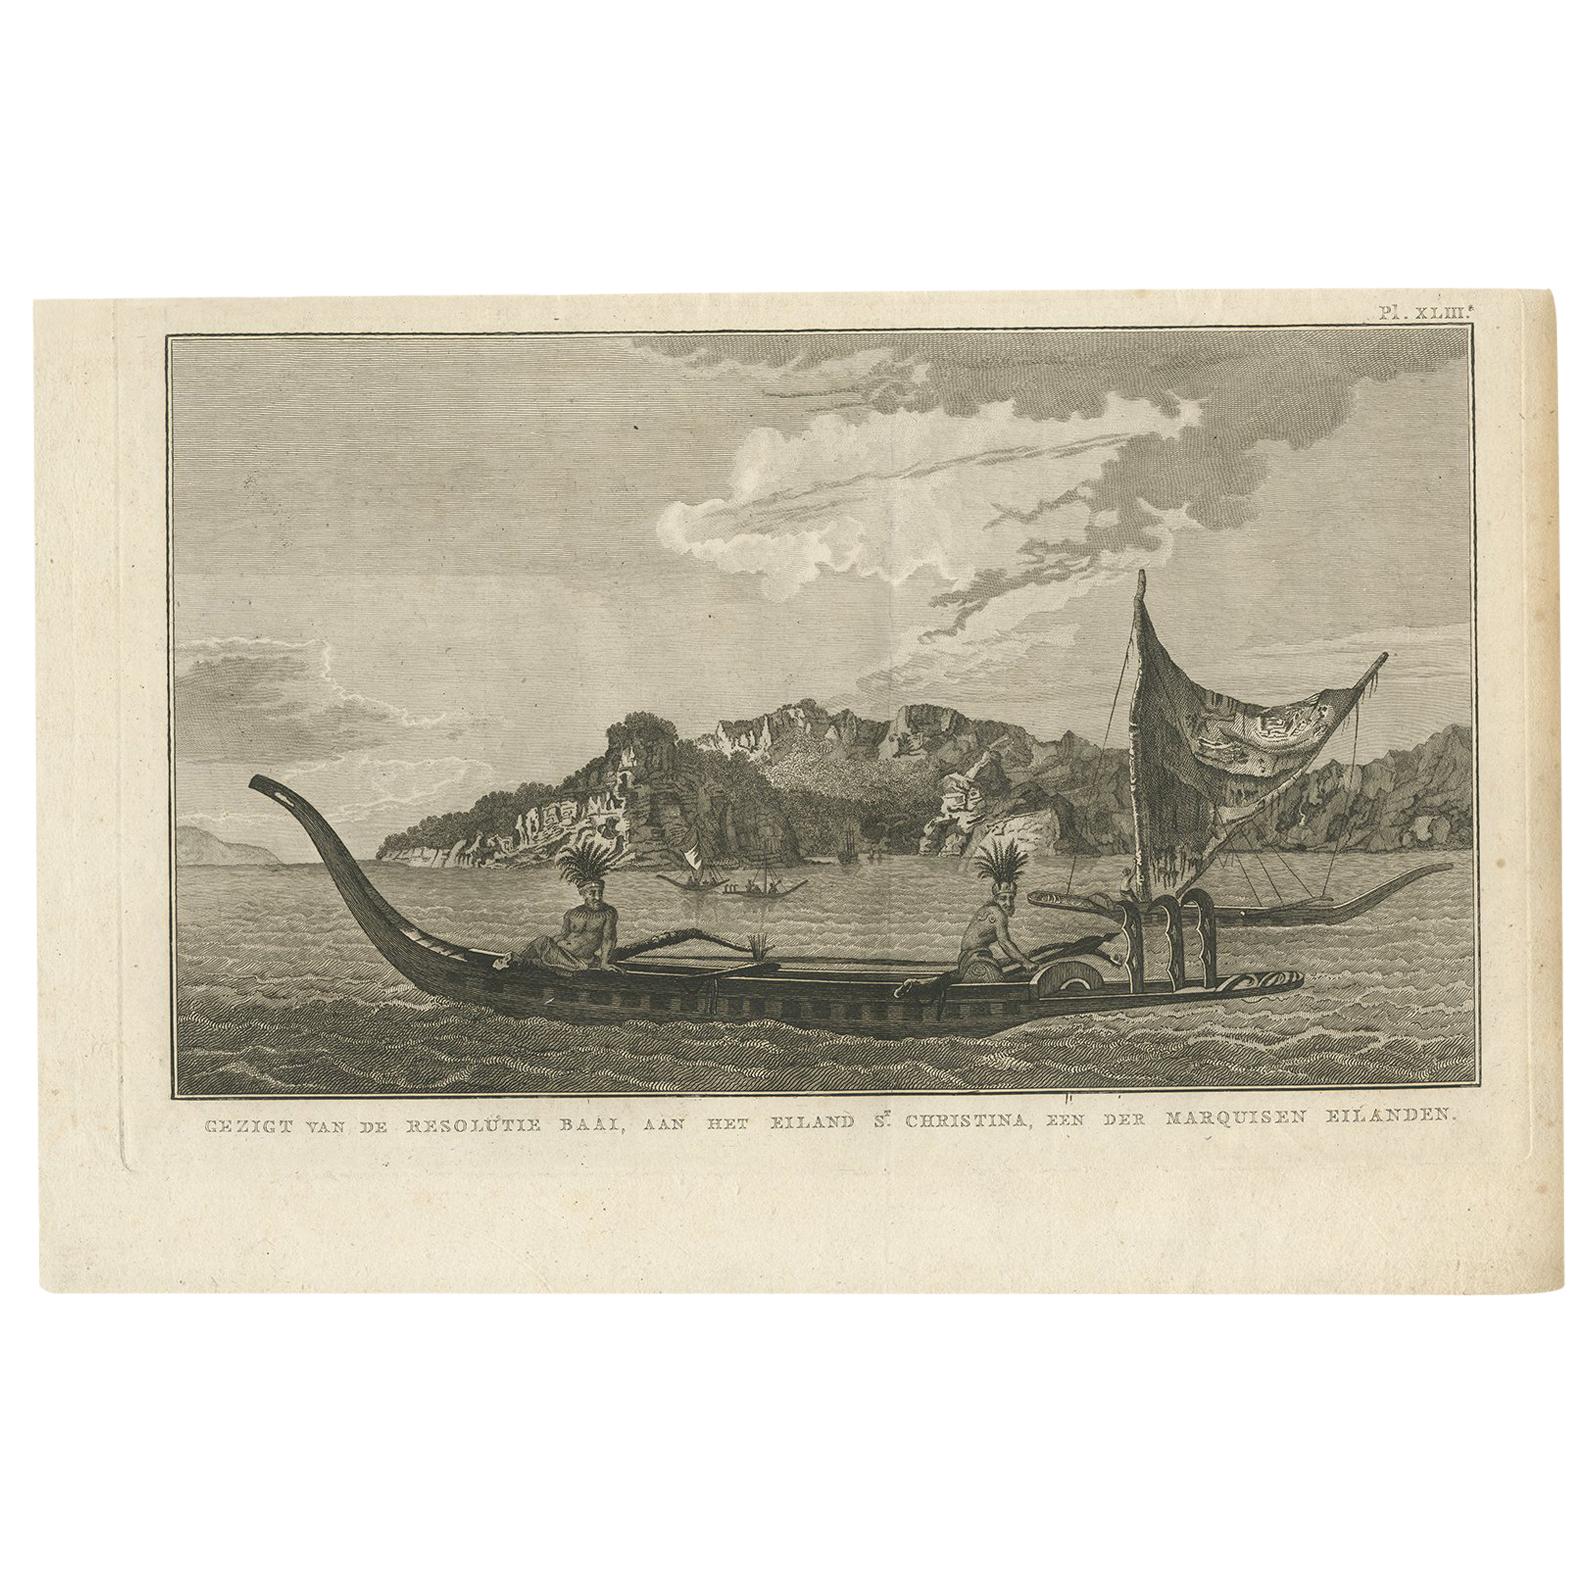 Resolution Bay on St. Christina: A Glimpse of the Marquesas in Cook's Voyages